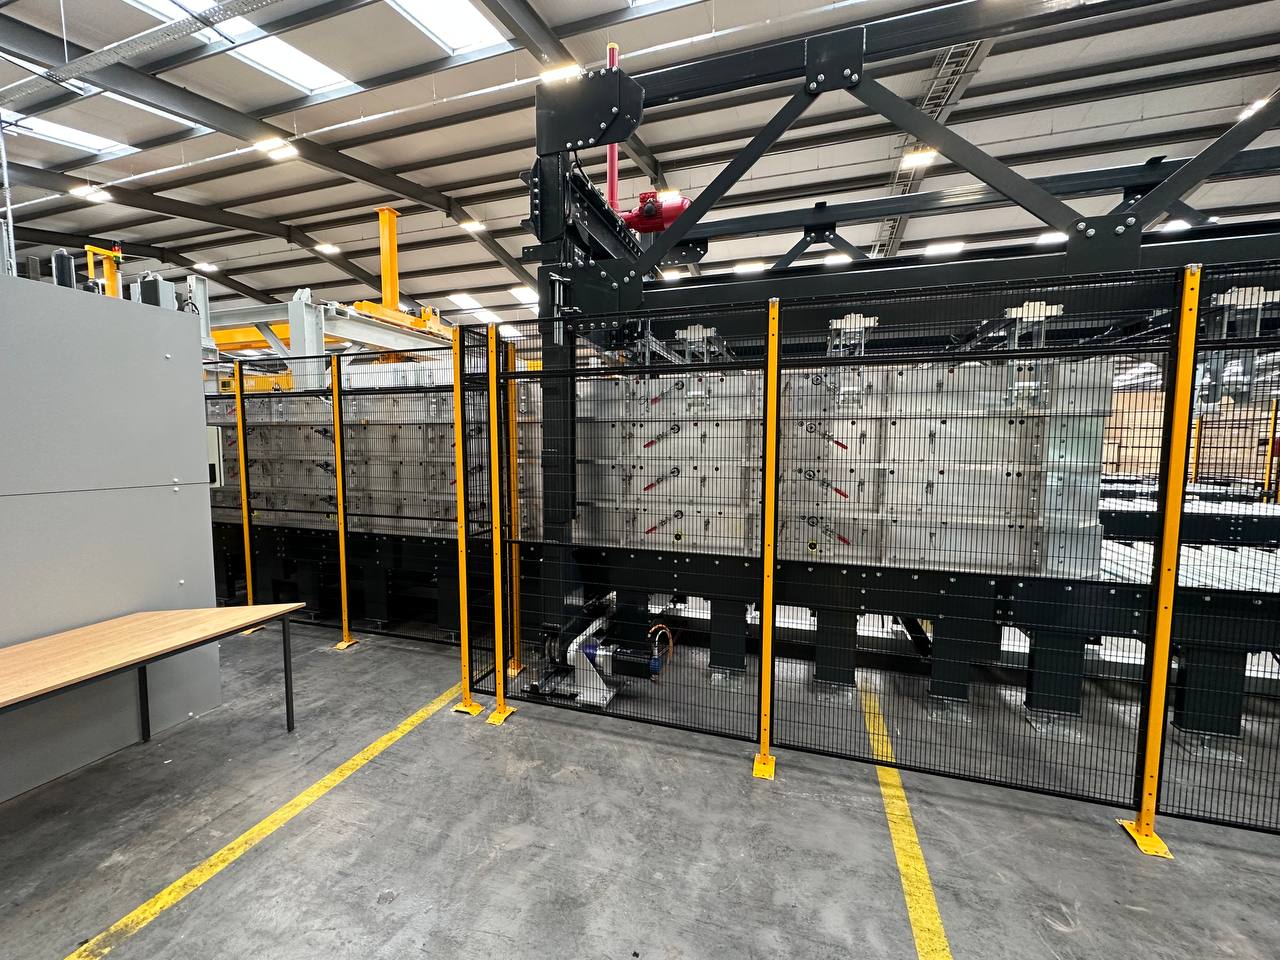 Axiom GB Ltd is a designer & manufacturer of material handling solutions. Supplying bespoke designed components can be achieved with standard supply. Let’s talk…. We’d love to help you solve your materials handling challenges. www.axiomgb.com sales@axiomgb.com +44(0)1827 61212